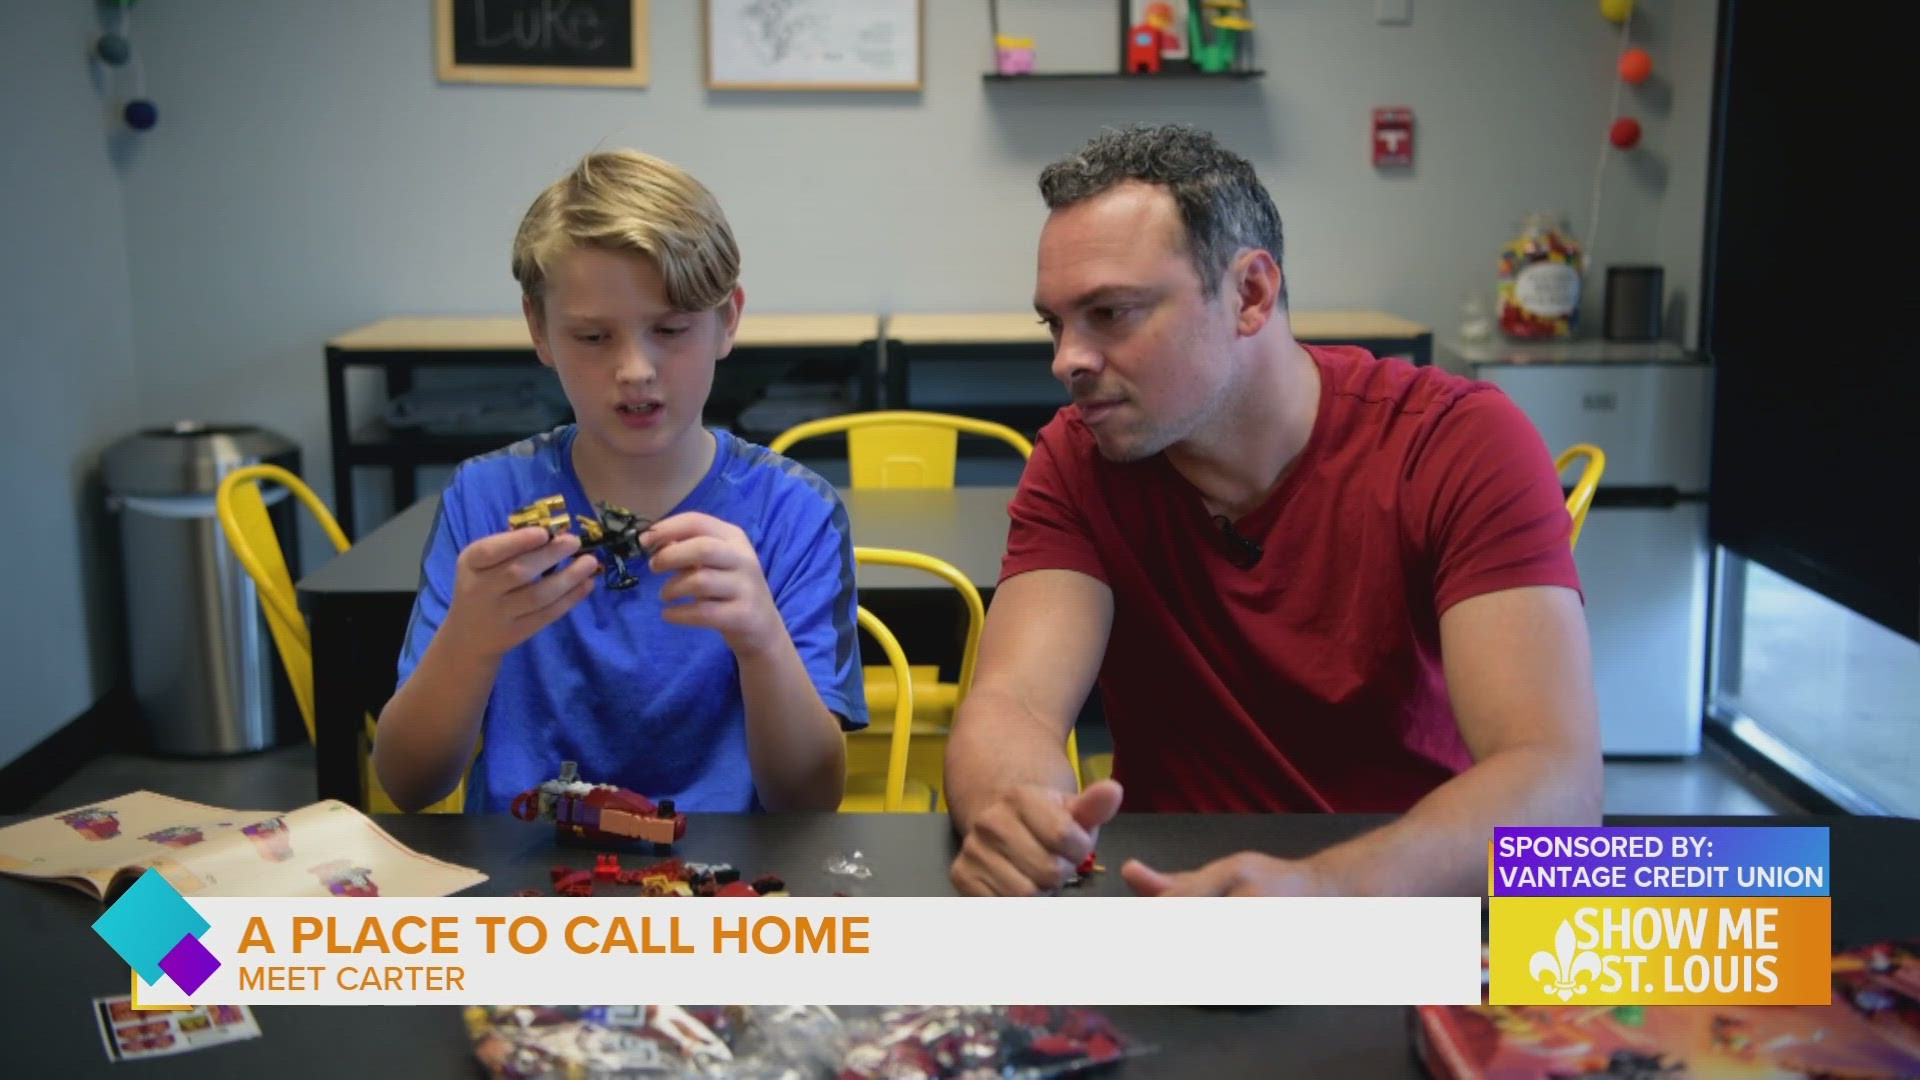 If you like Legos, Anthony Slaughter found the perfect spot for one master builder in today's A Place to Call Home.